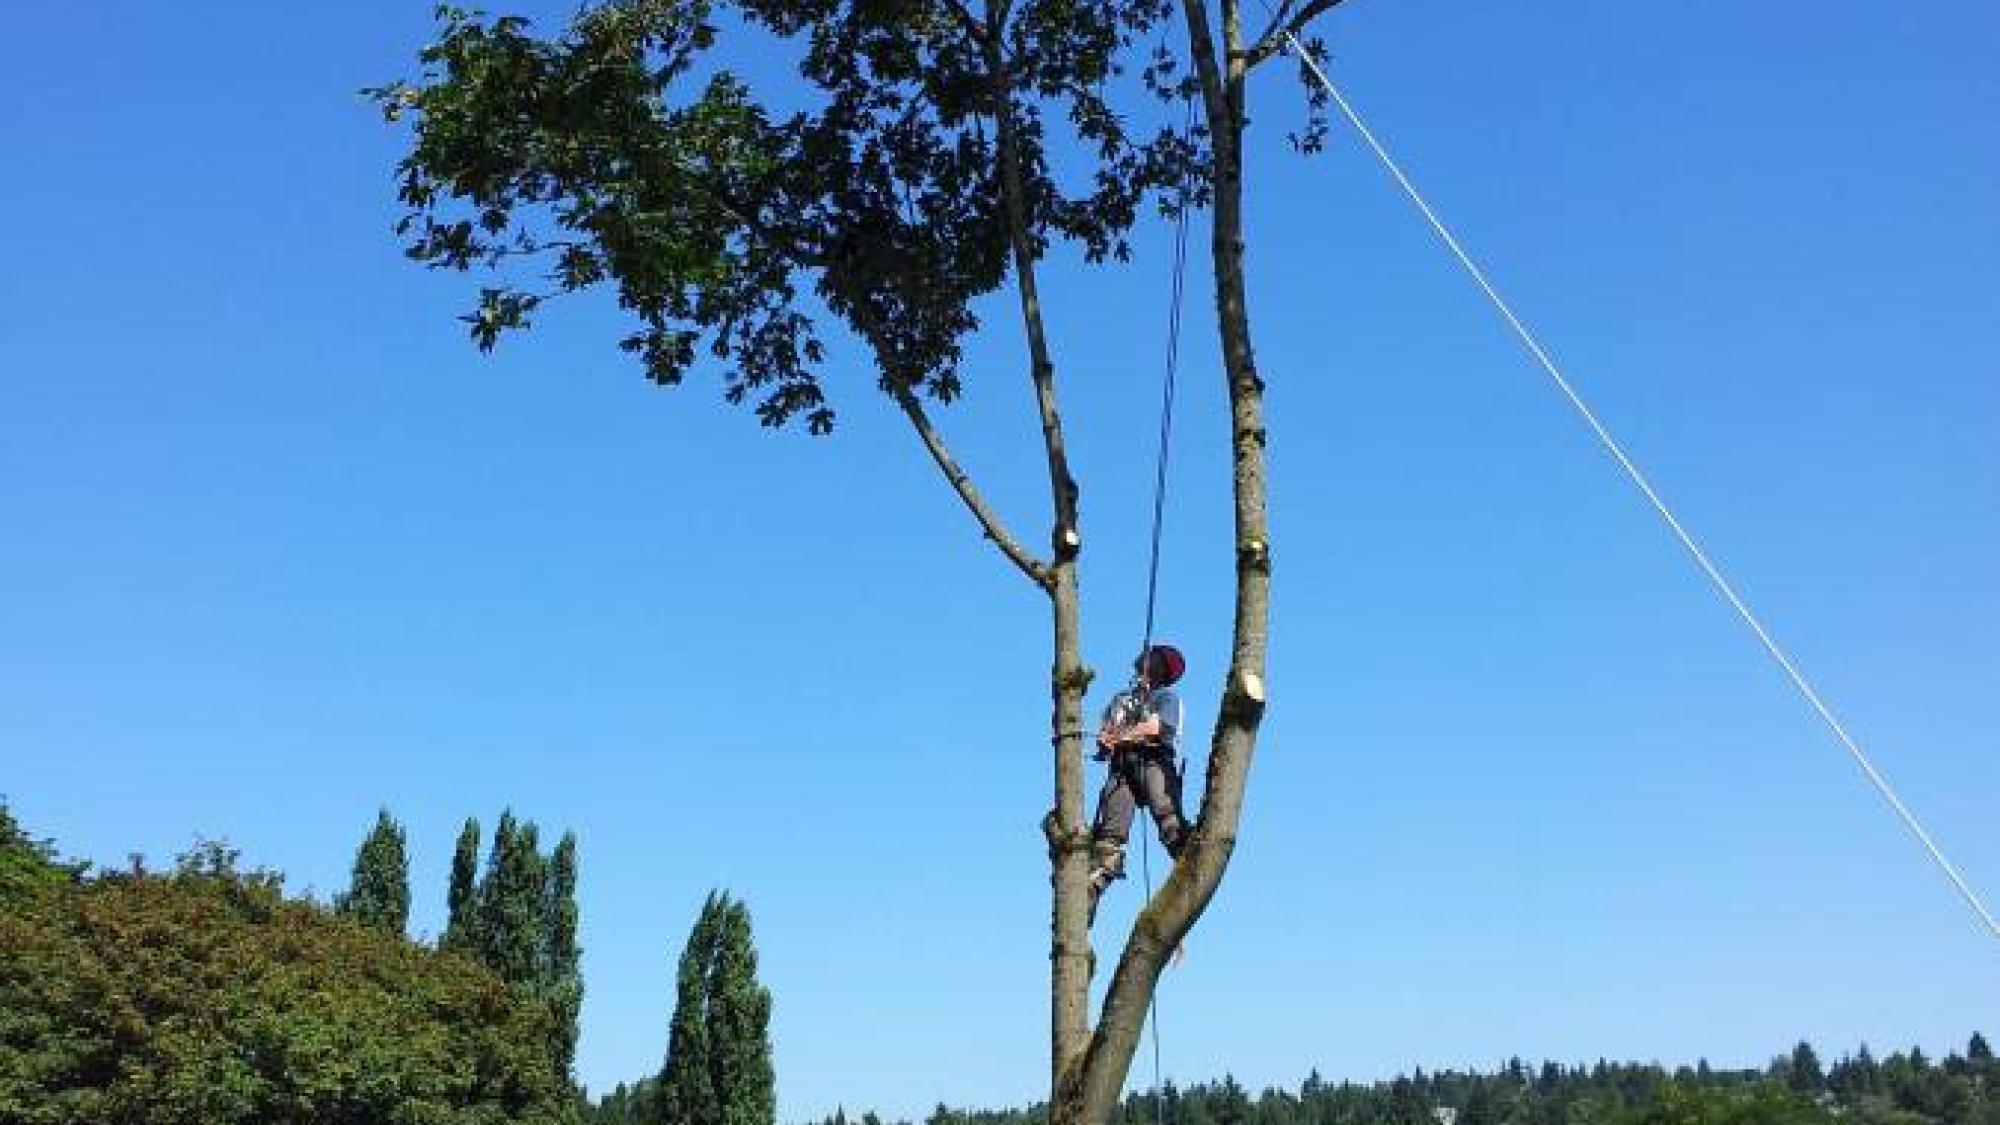 What are the costs for the tree work services?